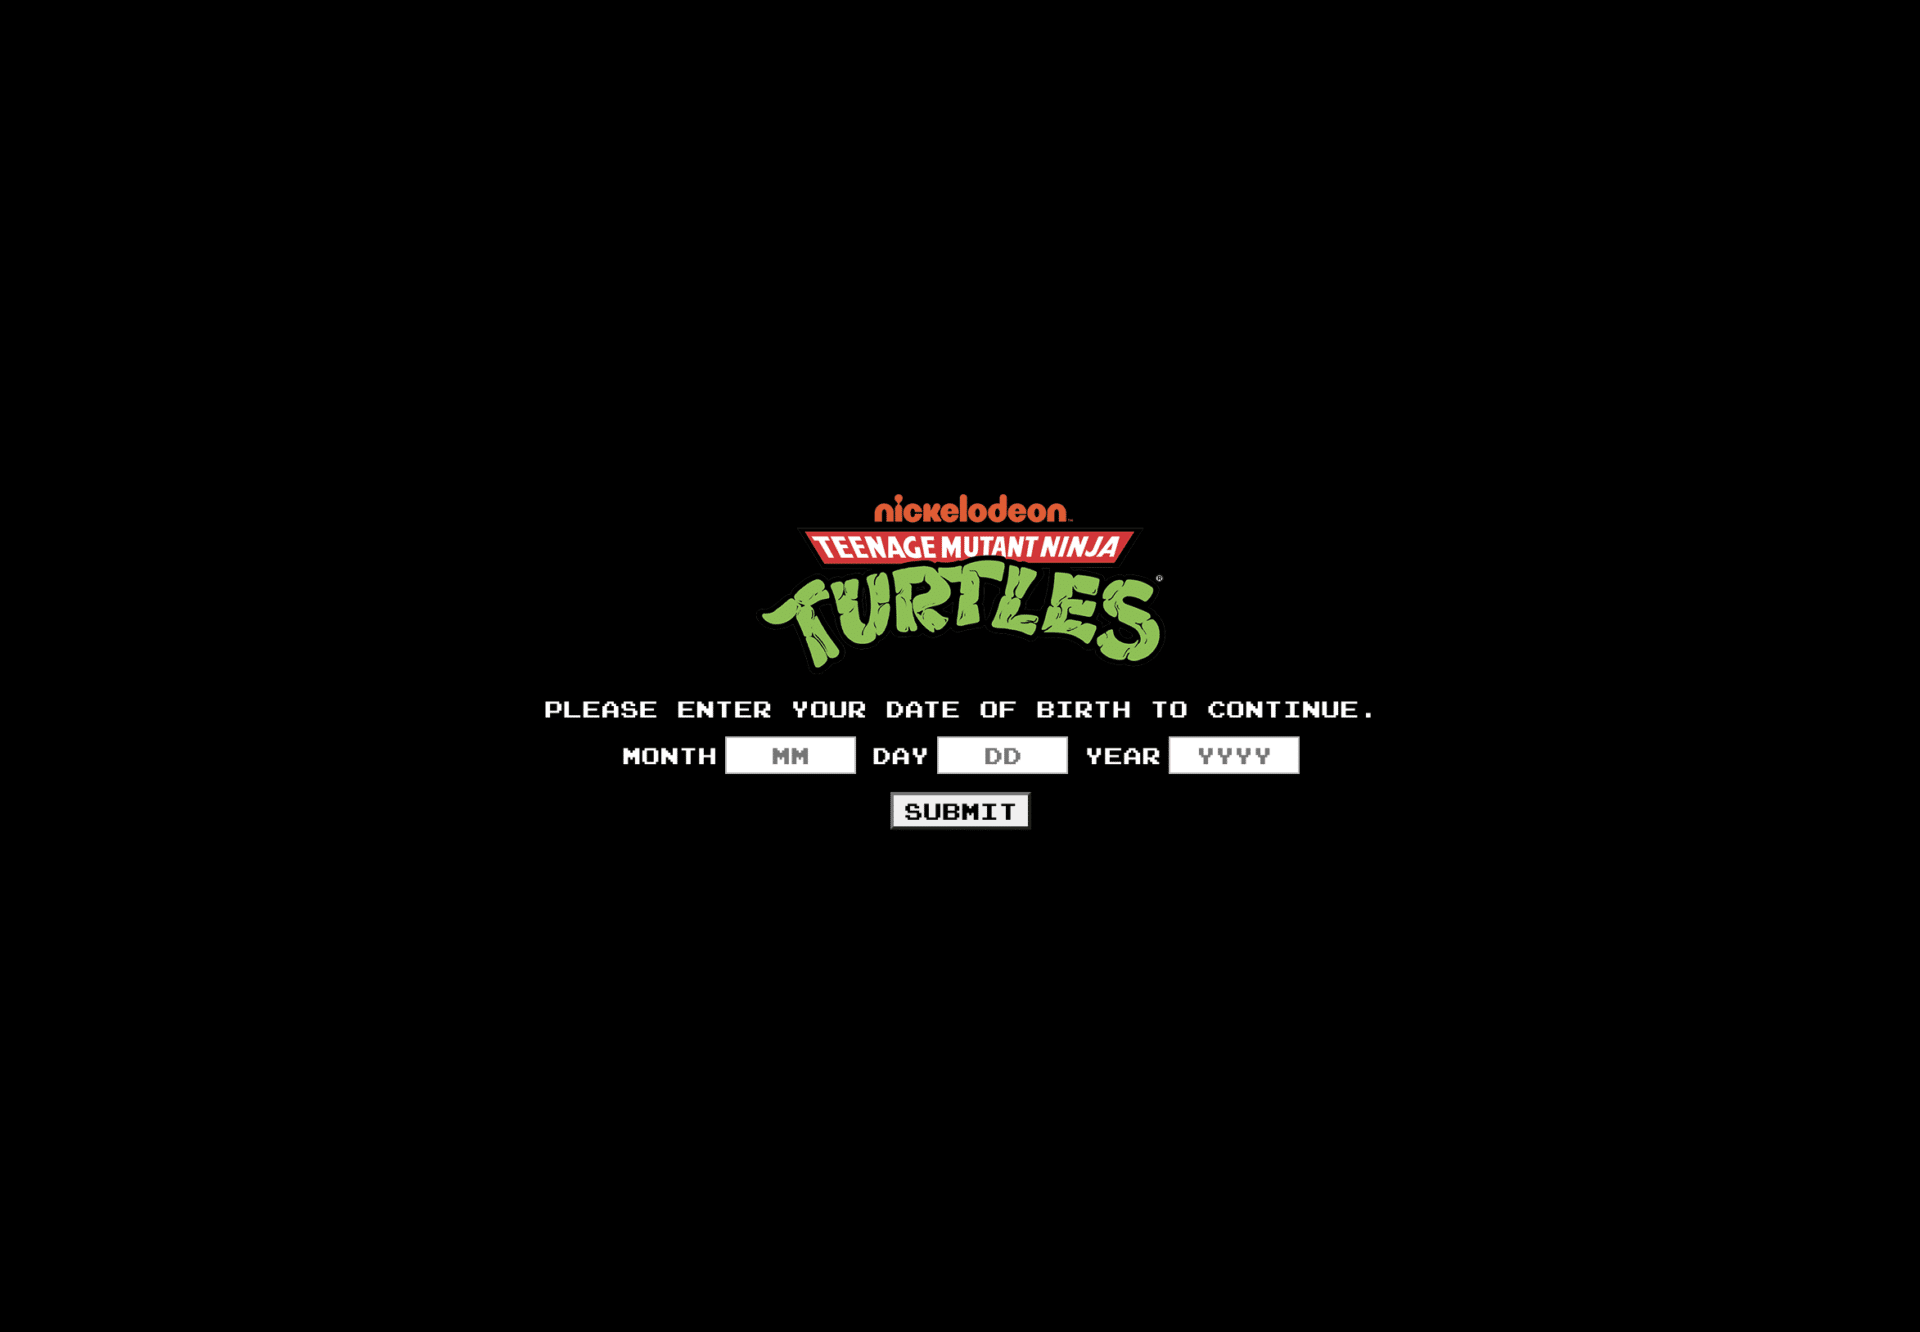 Turtle Power Sweepstakes 